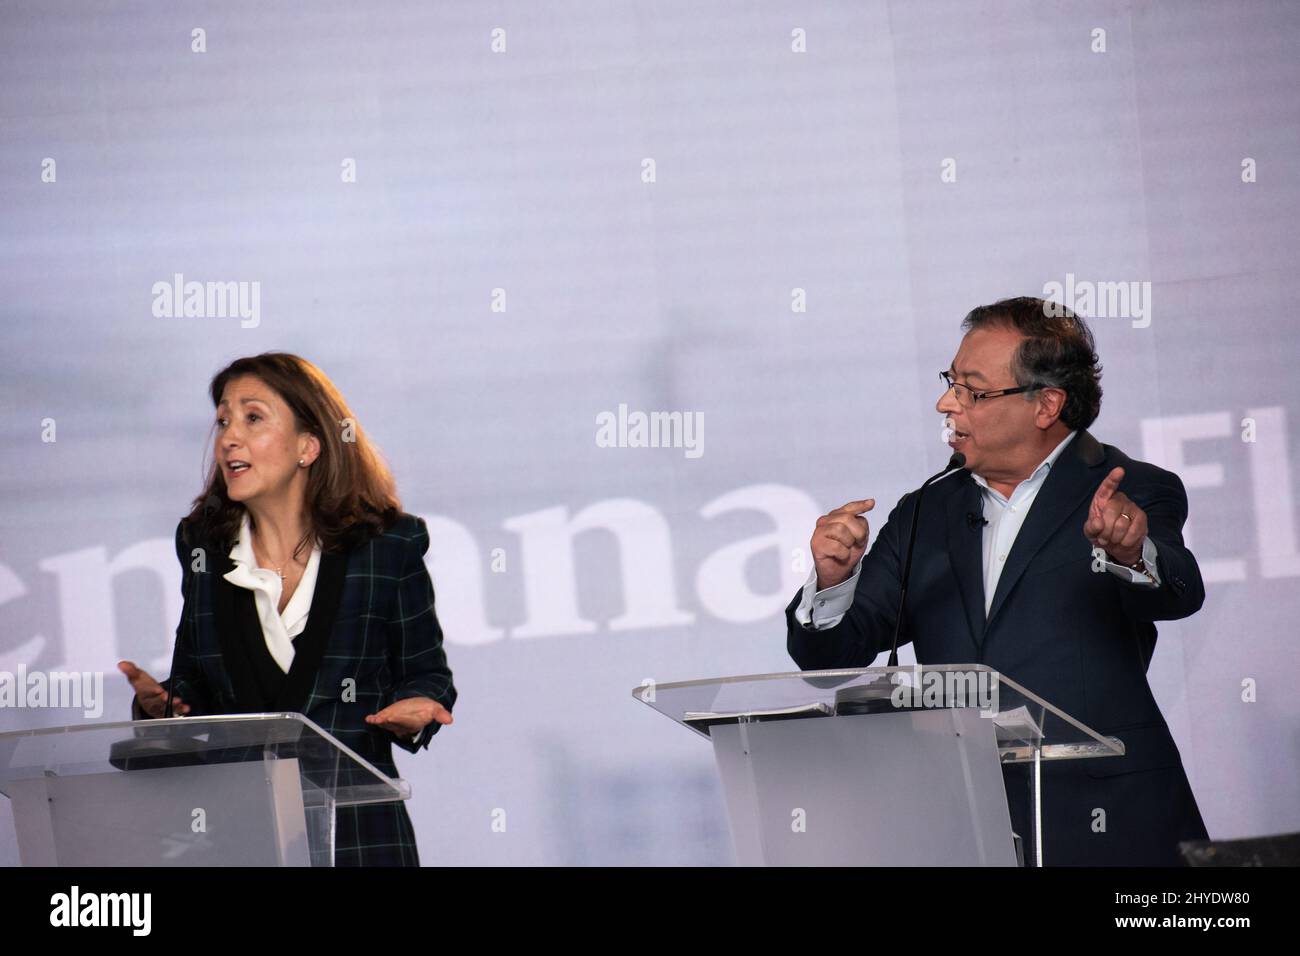 Bogota, Colombia. 14th Mar, 2022. Presidential candidate franch-colombian Ingrid Betancourt for political party 'Partido Verde Oxigeno' argues with leftist candidate for 'Pacto Historico' Gustavo Petro during the first debate after the preliminary elections in Bogota, Colombia, on March 14, 2022. Petro, from the leftist coalition 'Pacto Historico' won the most votes during the preliminary consultation during the congressional elections. Photo by: Daniel Romero/Long Visual Press Credit: Long Visual Press/Alamy Live News Stock Photo